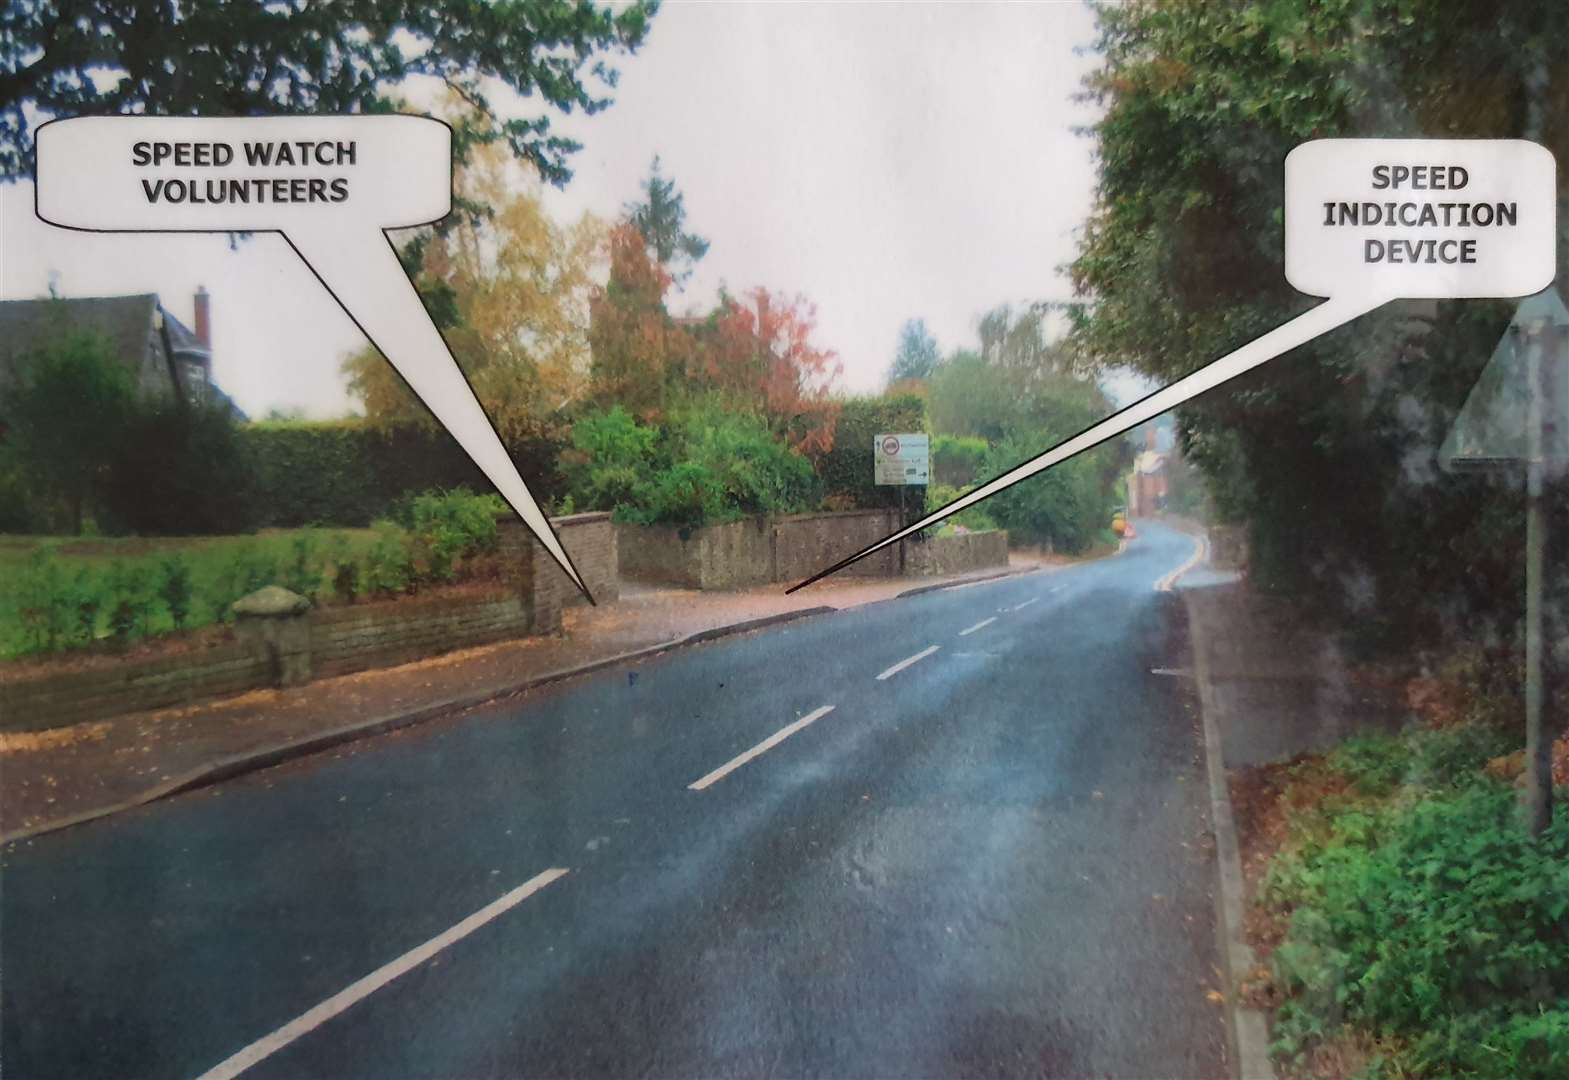 An explanation of how the Speedwatch group operates in Red Hill (26399014)